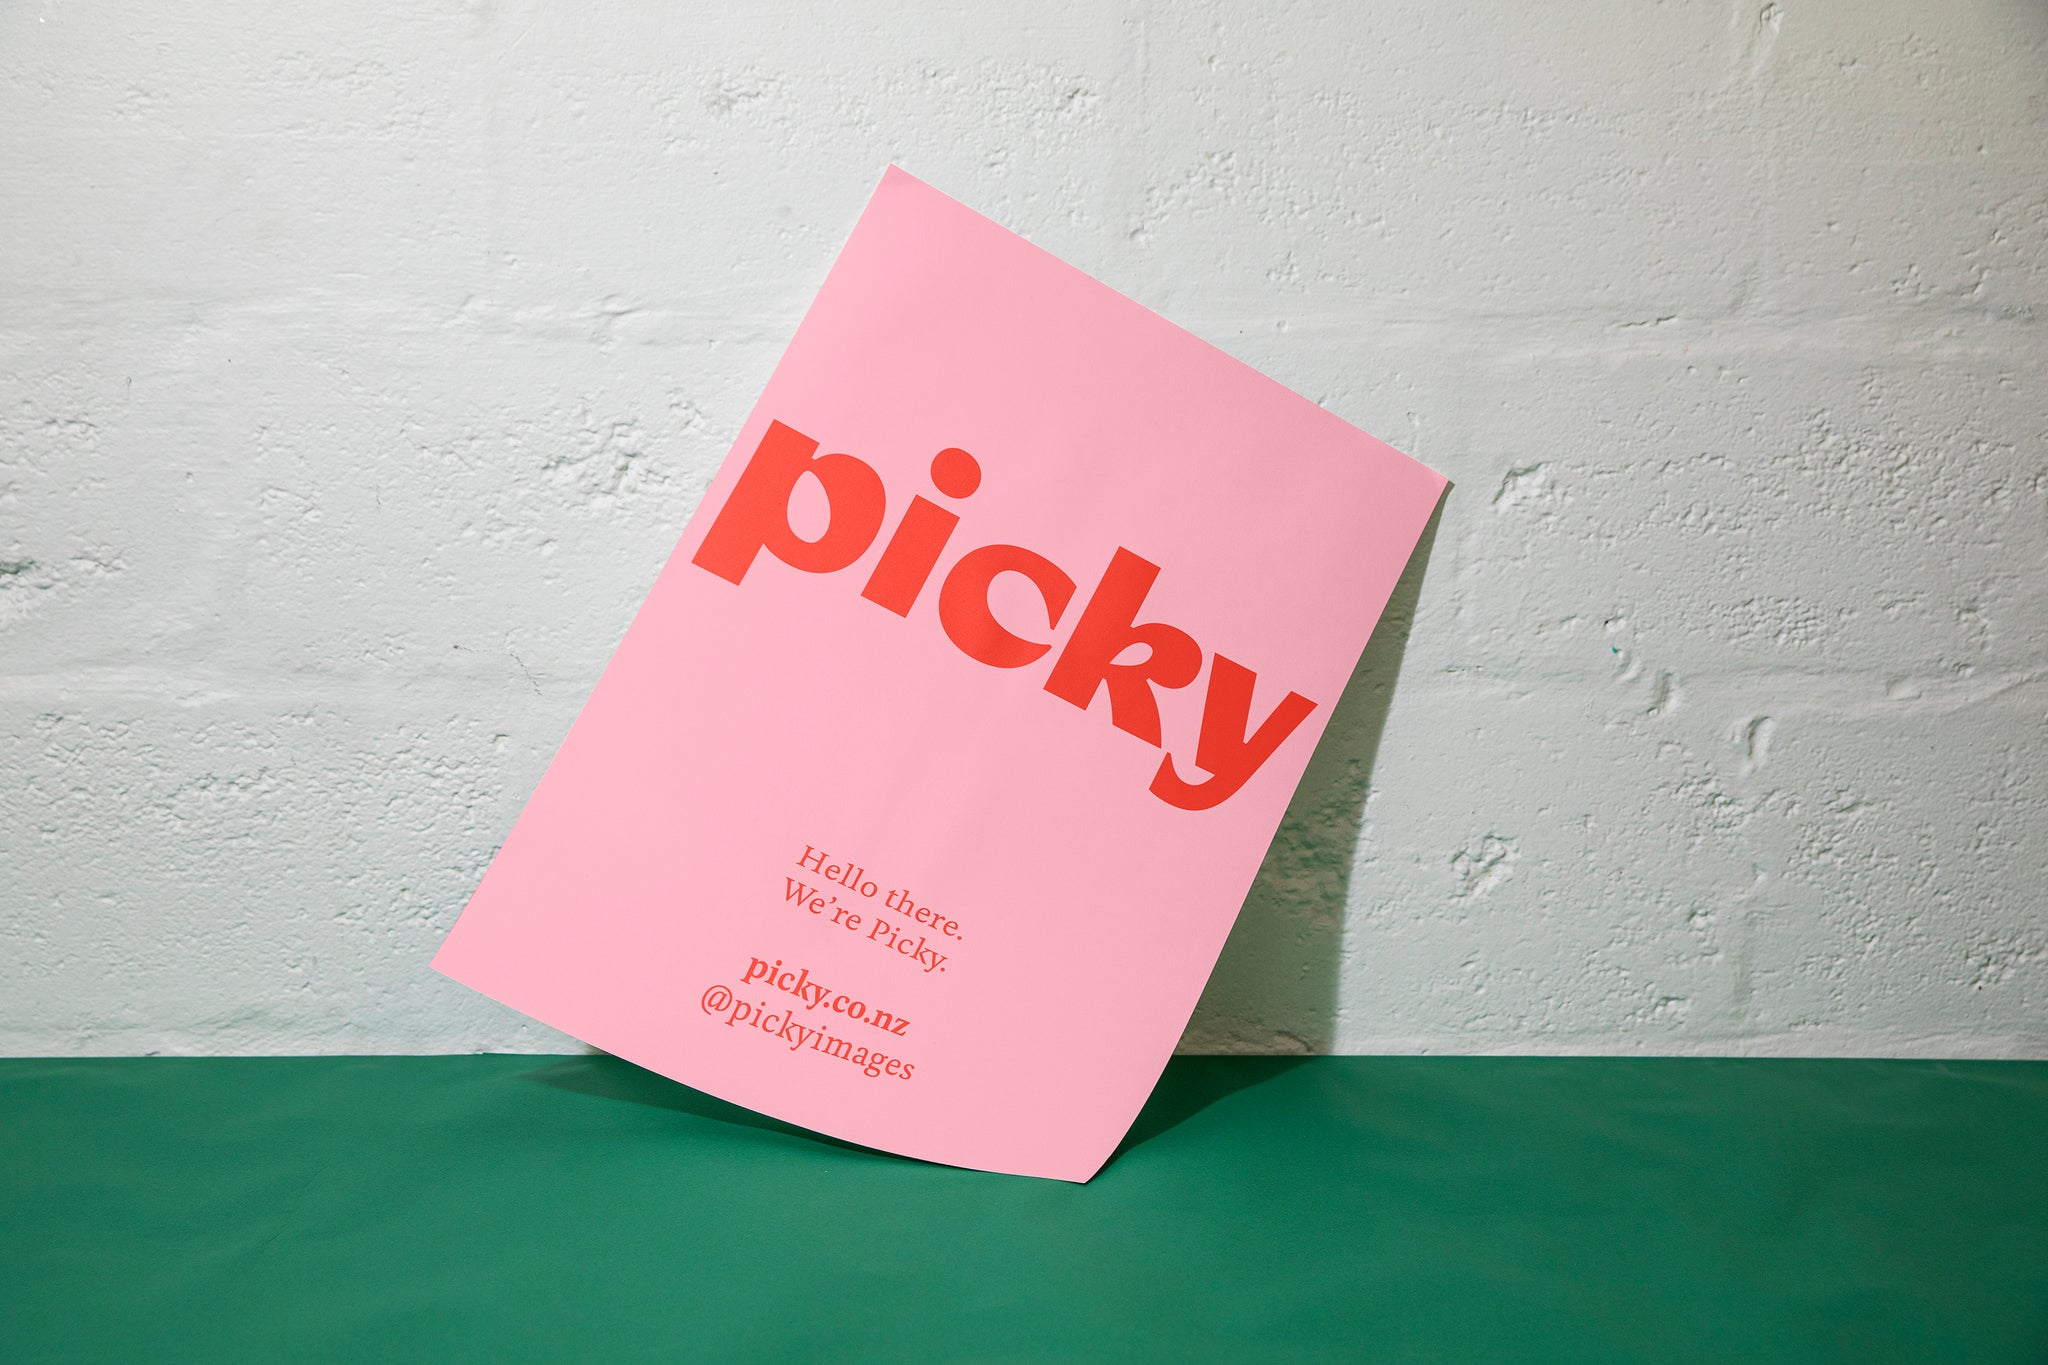 A pink piece of card is sitting against a white cinder block wall and green surface. The card is pink with the word Picky written largely cross the paper. Small copy is visble at the bottom half. 